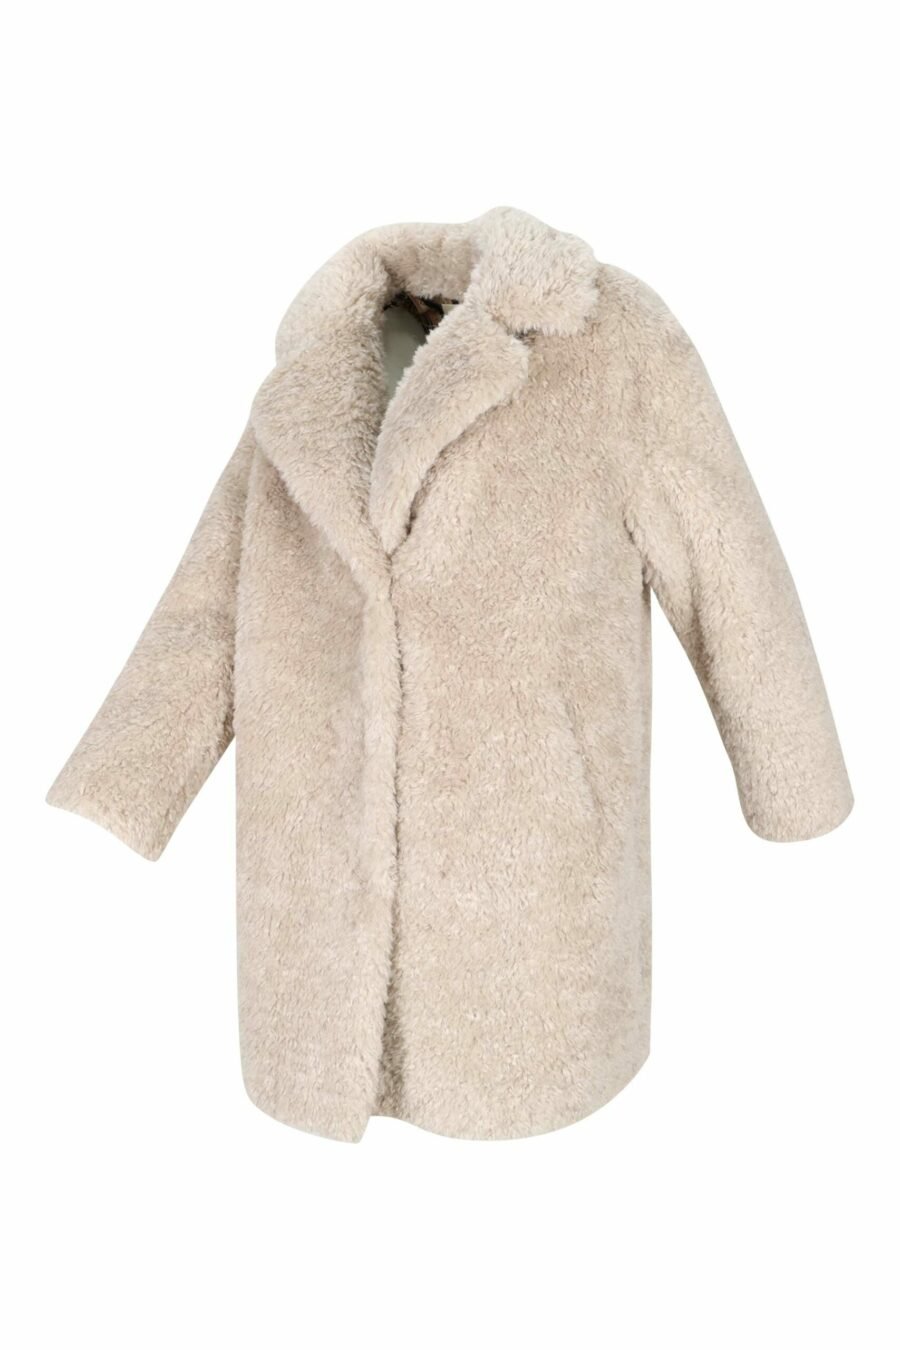 White curly faux fur coat with printed inner lining - 8055721641478 1 scaled